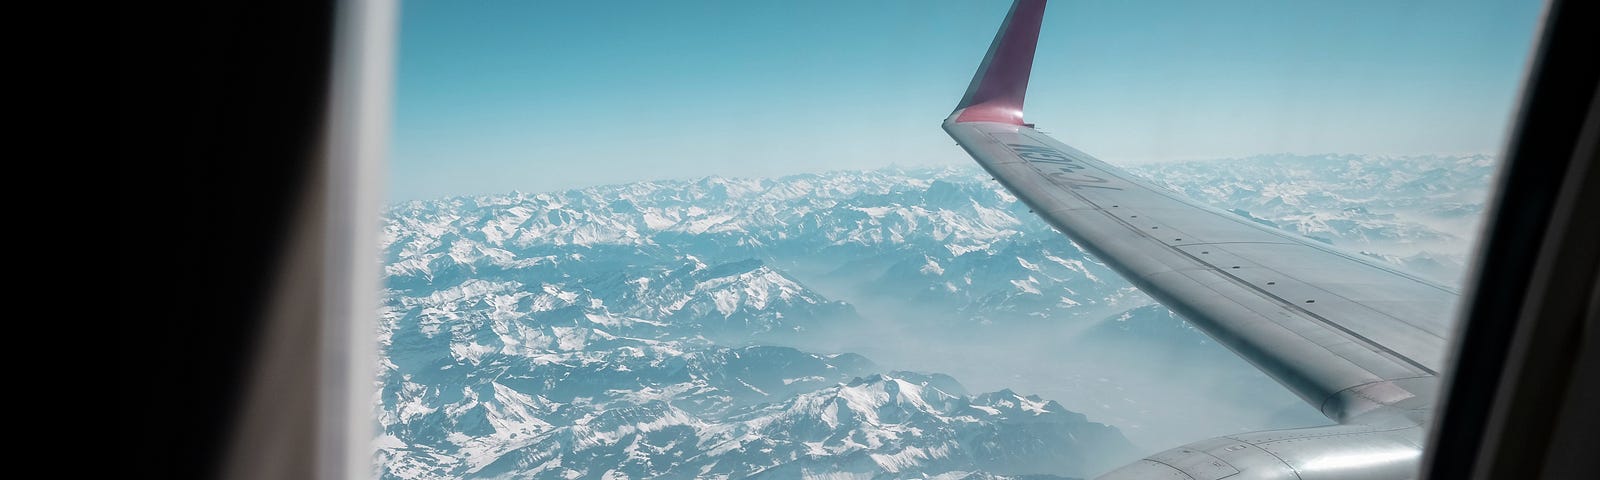 View of sky and snow-covered mountains under engine and wing of a jet window